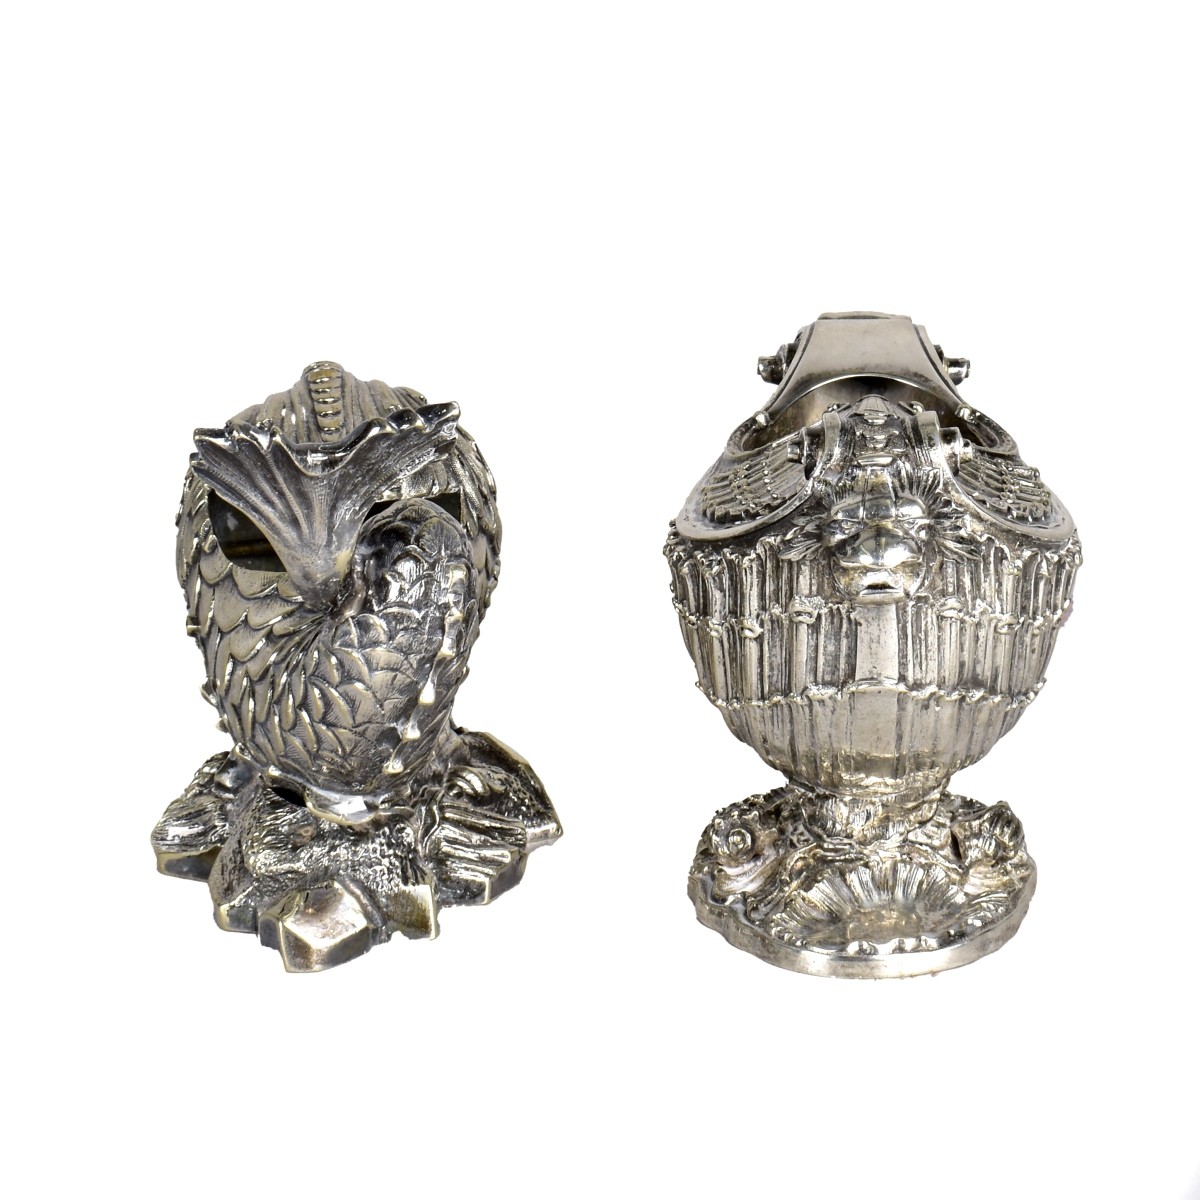 Two 19th C. Victorian Spoon Warmers